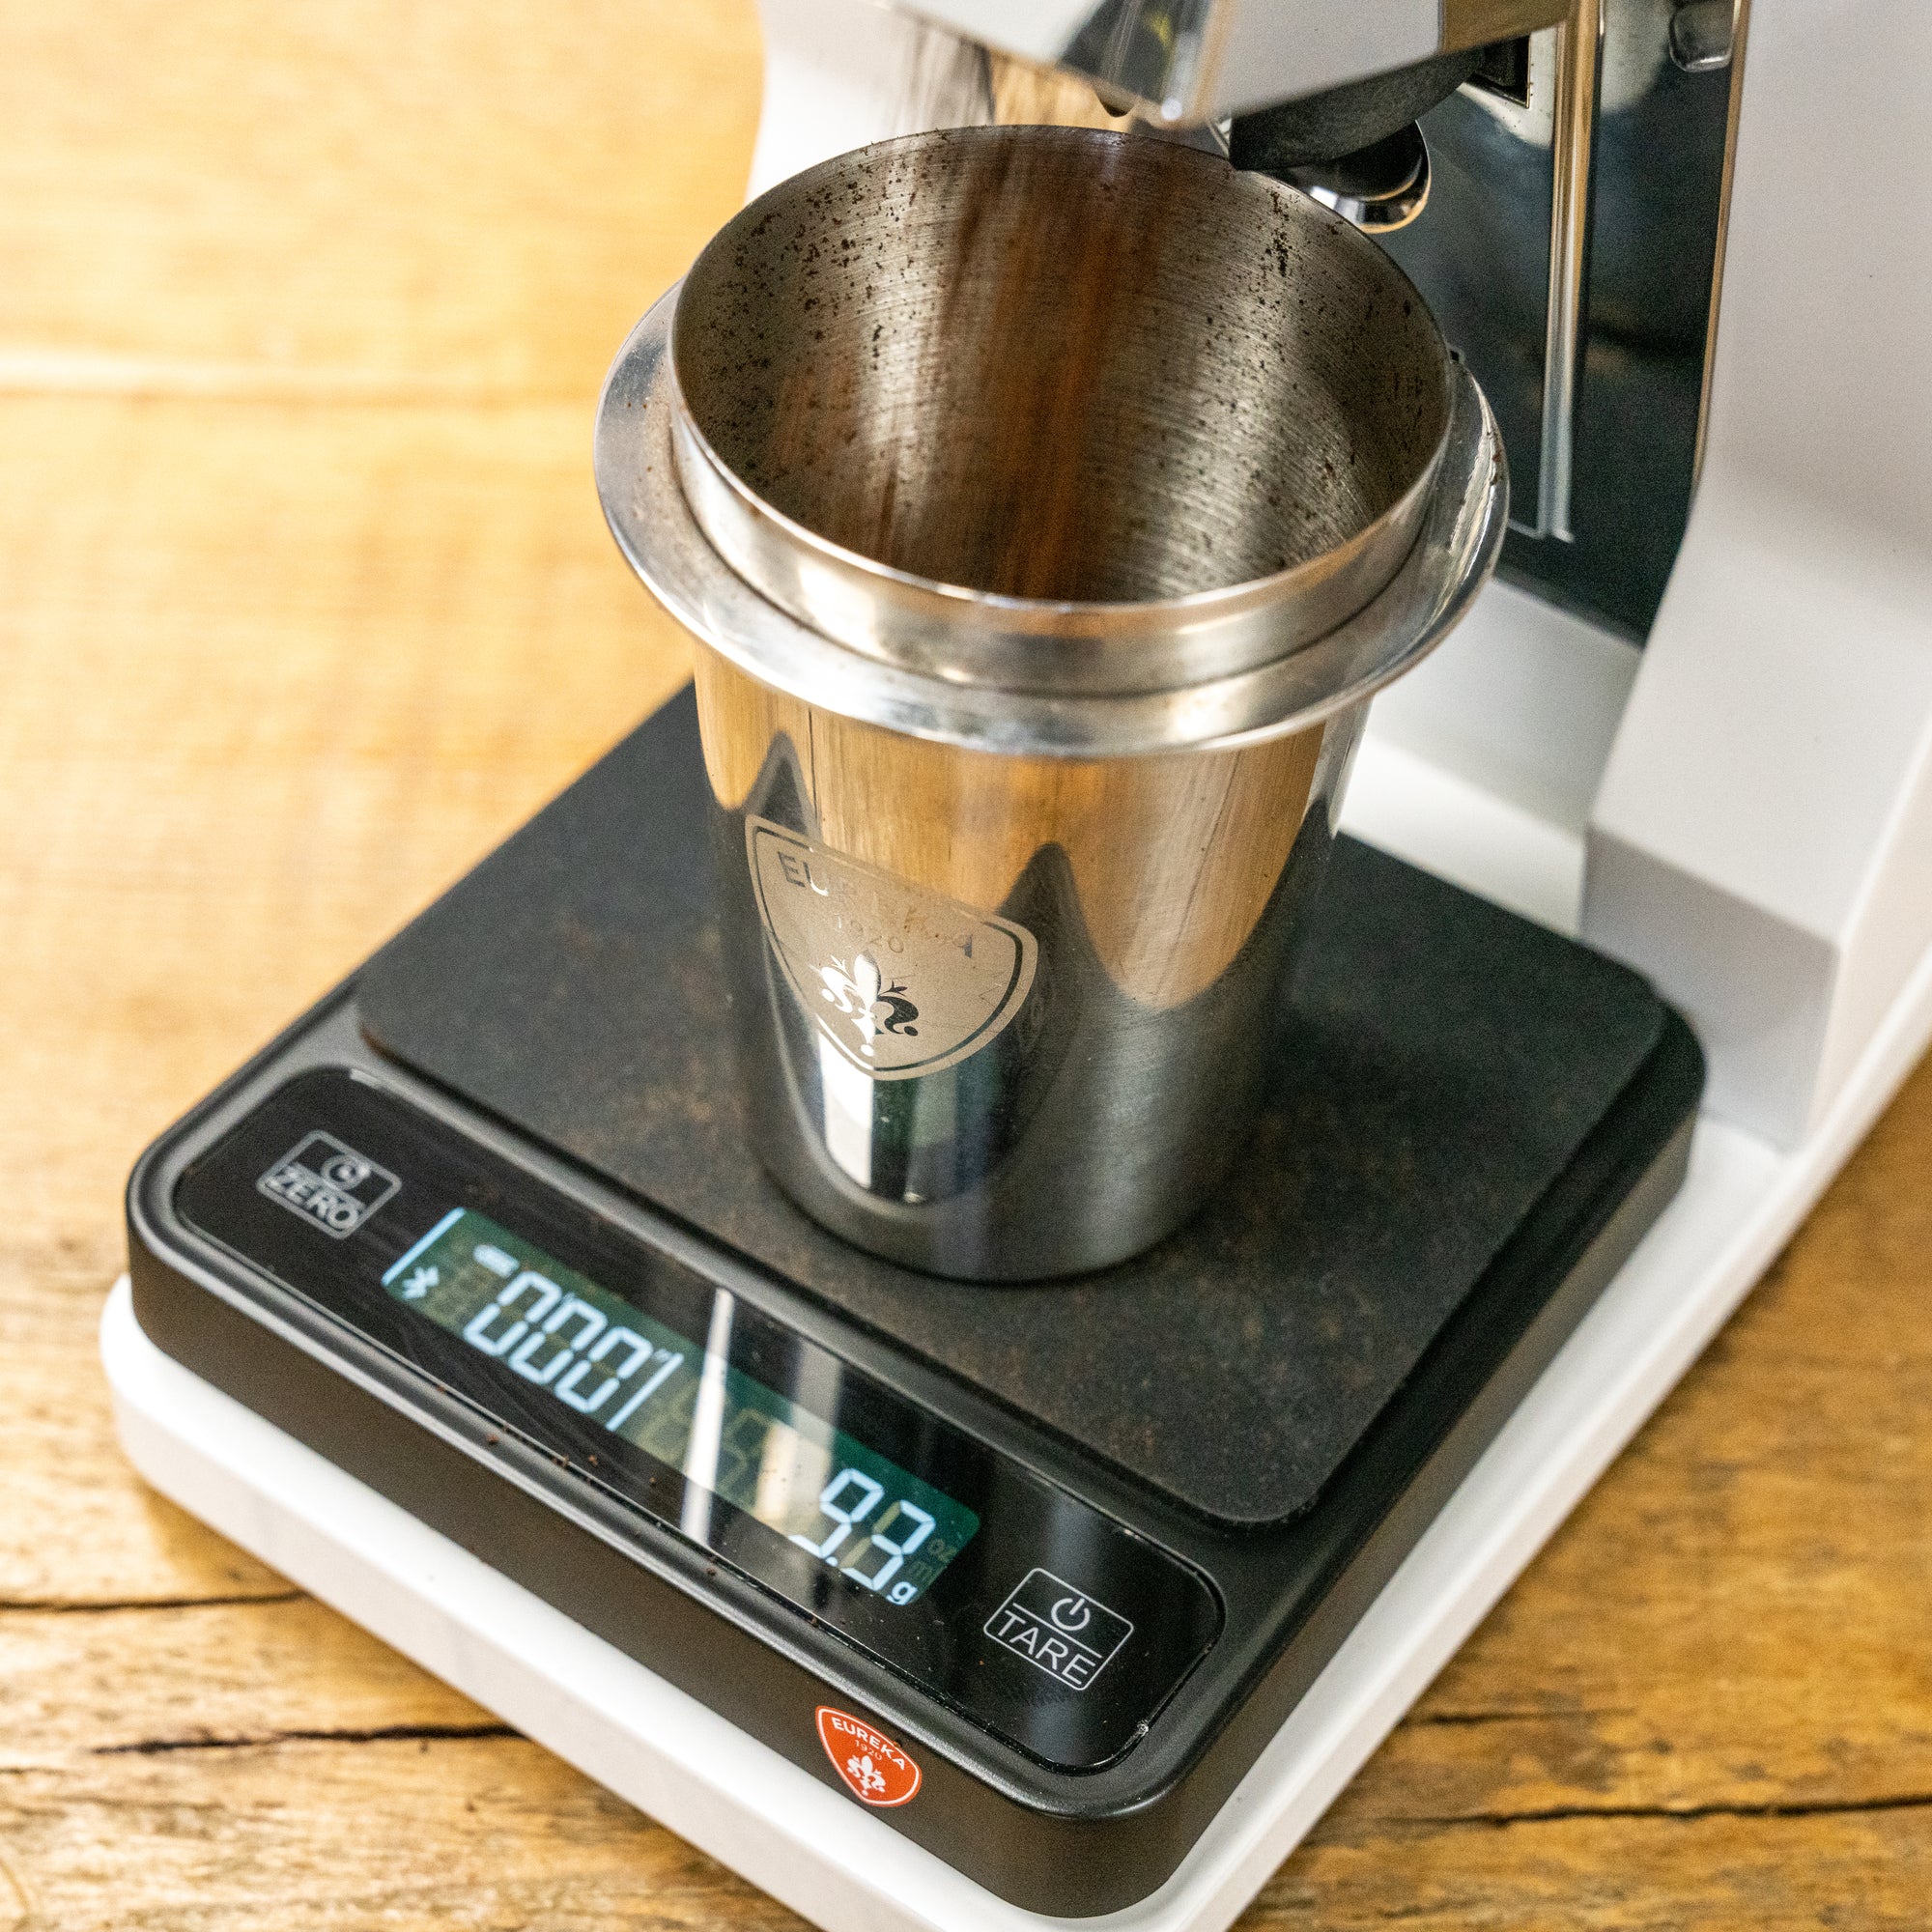 Eurekas Bluetooth coffee scale comes with a pretty wild chinese